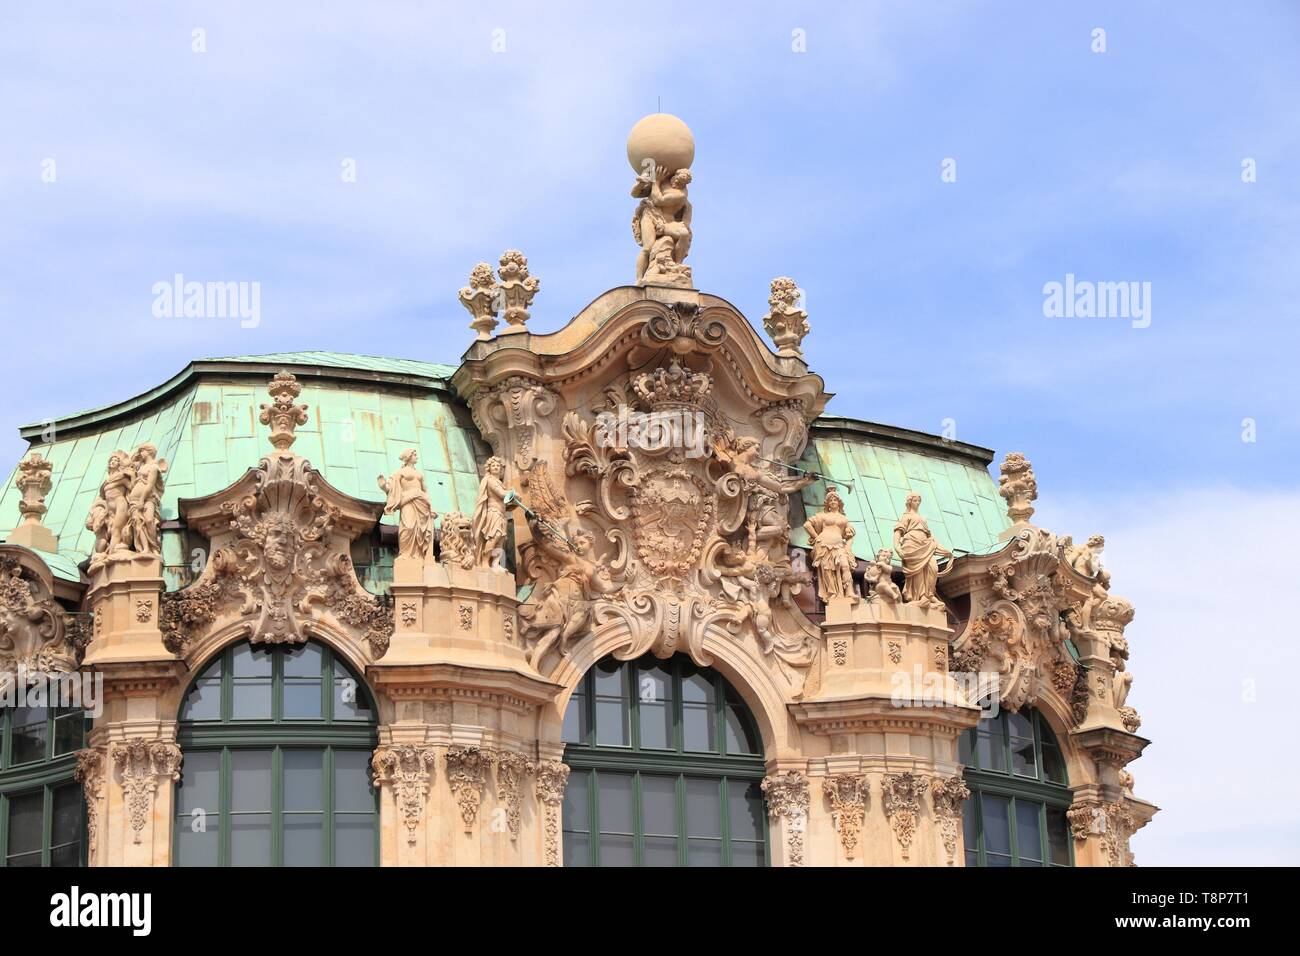 Baroque architecture of Zwinger Palace in Dresden, Germany. Stock Photo